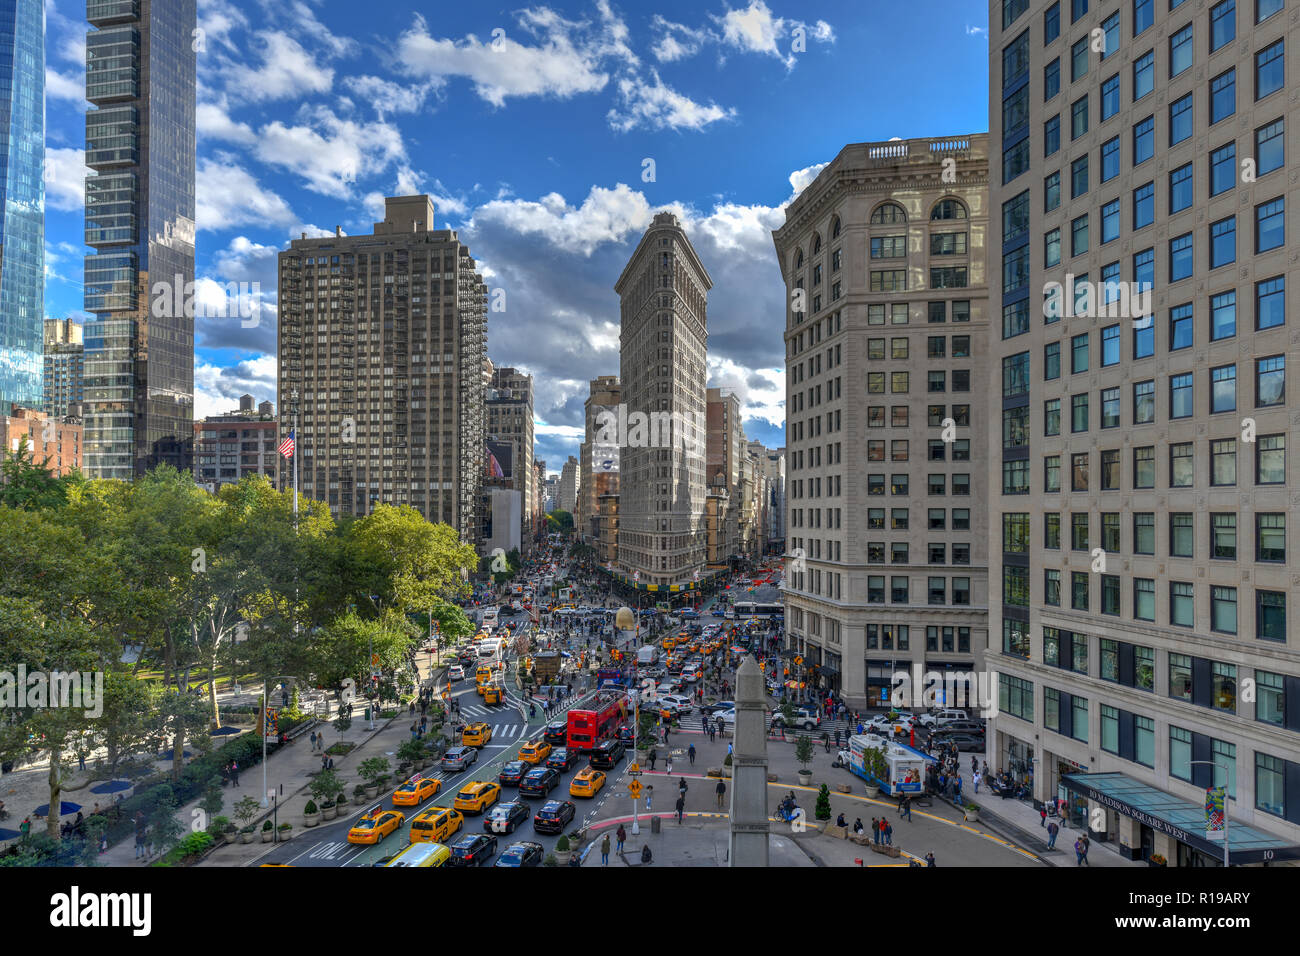 New York City - October 10, 2018: Aerial view of the Flat Iron building, one of the first skyscrapers ever built, with NYC Fifth Avenue and taxi cabs. Stock Photo